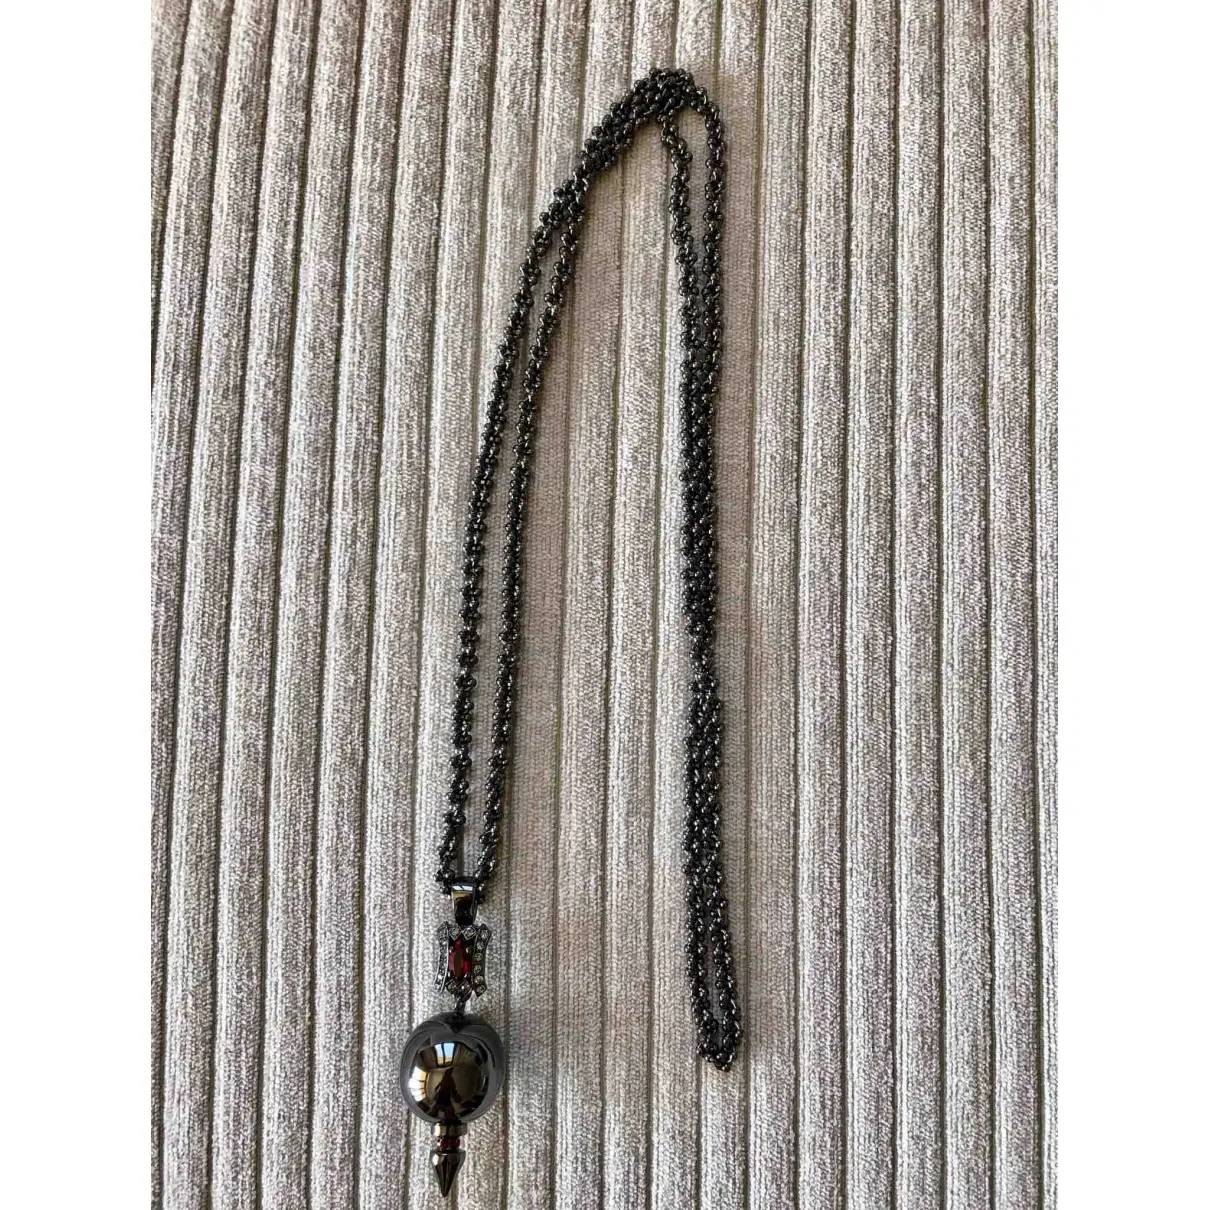 Mawi Long necklace for sale